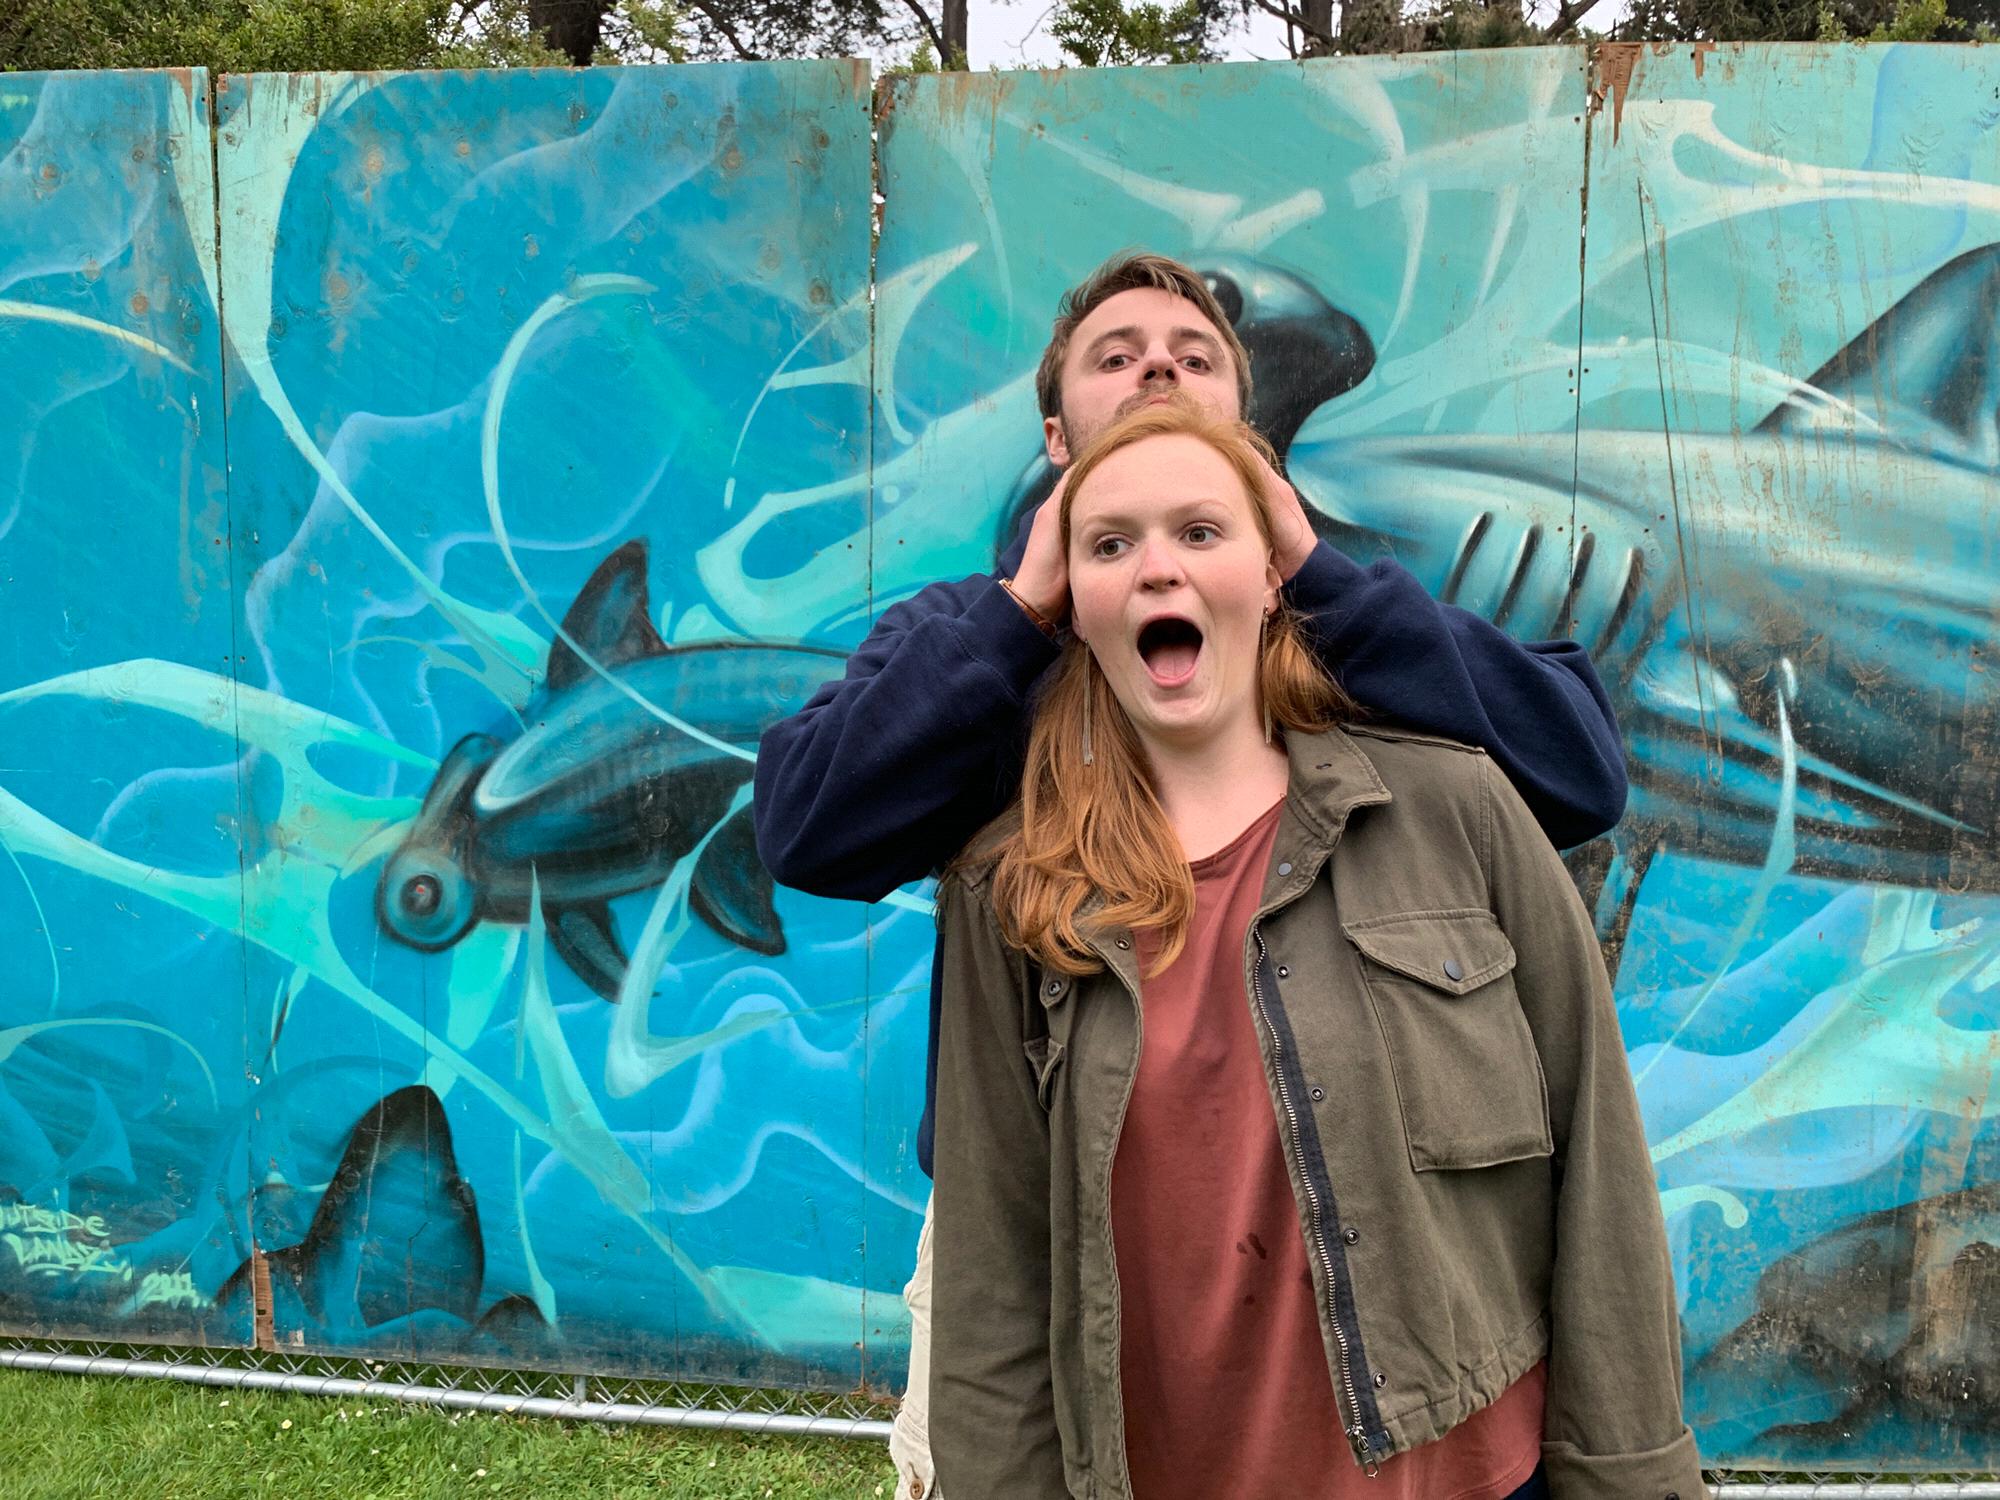 Wacky Poses at San Francisco’s Outside Lands Music Festival! August 2019